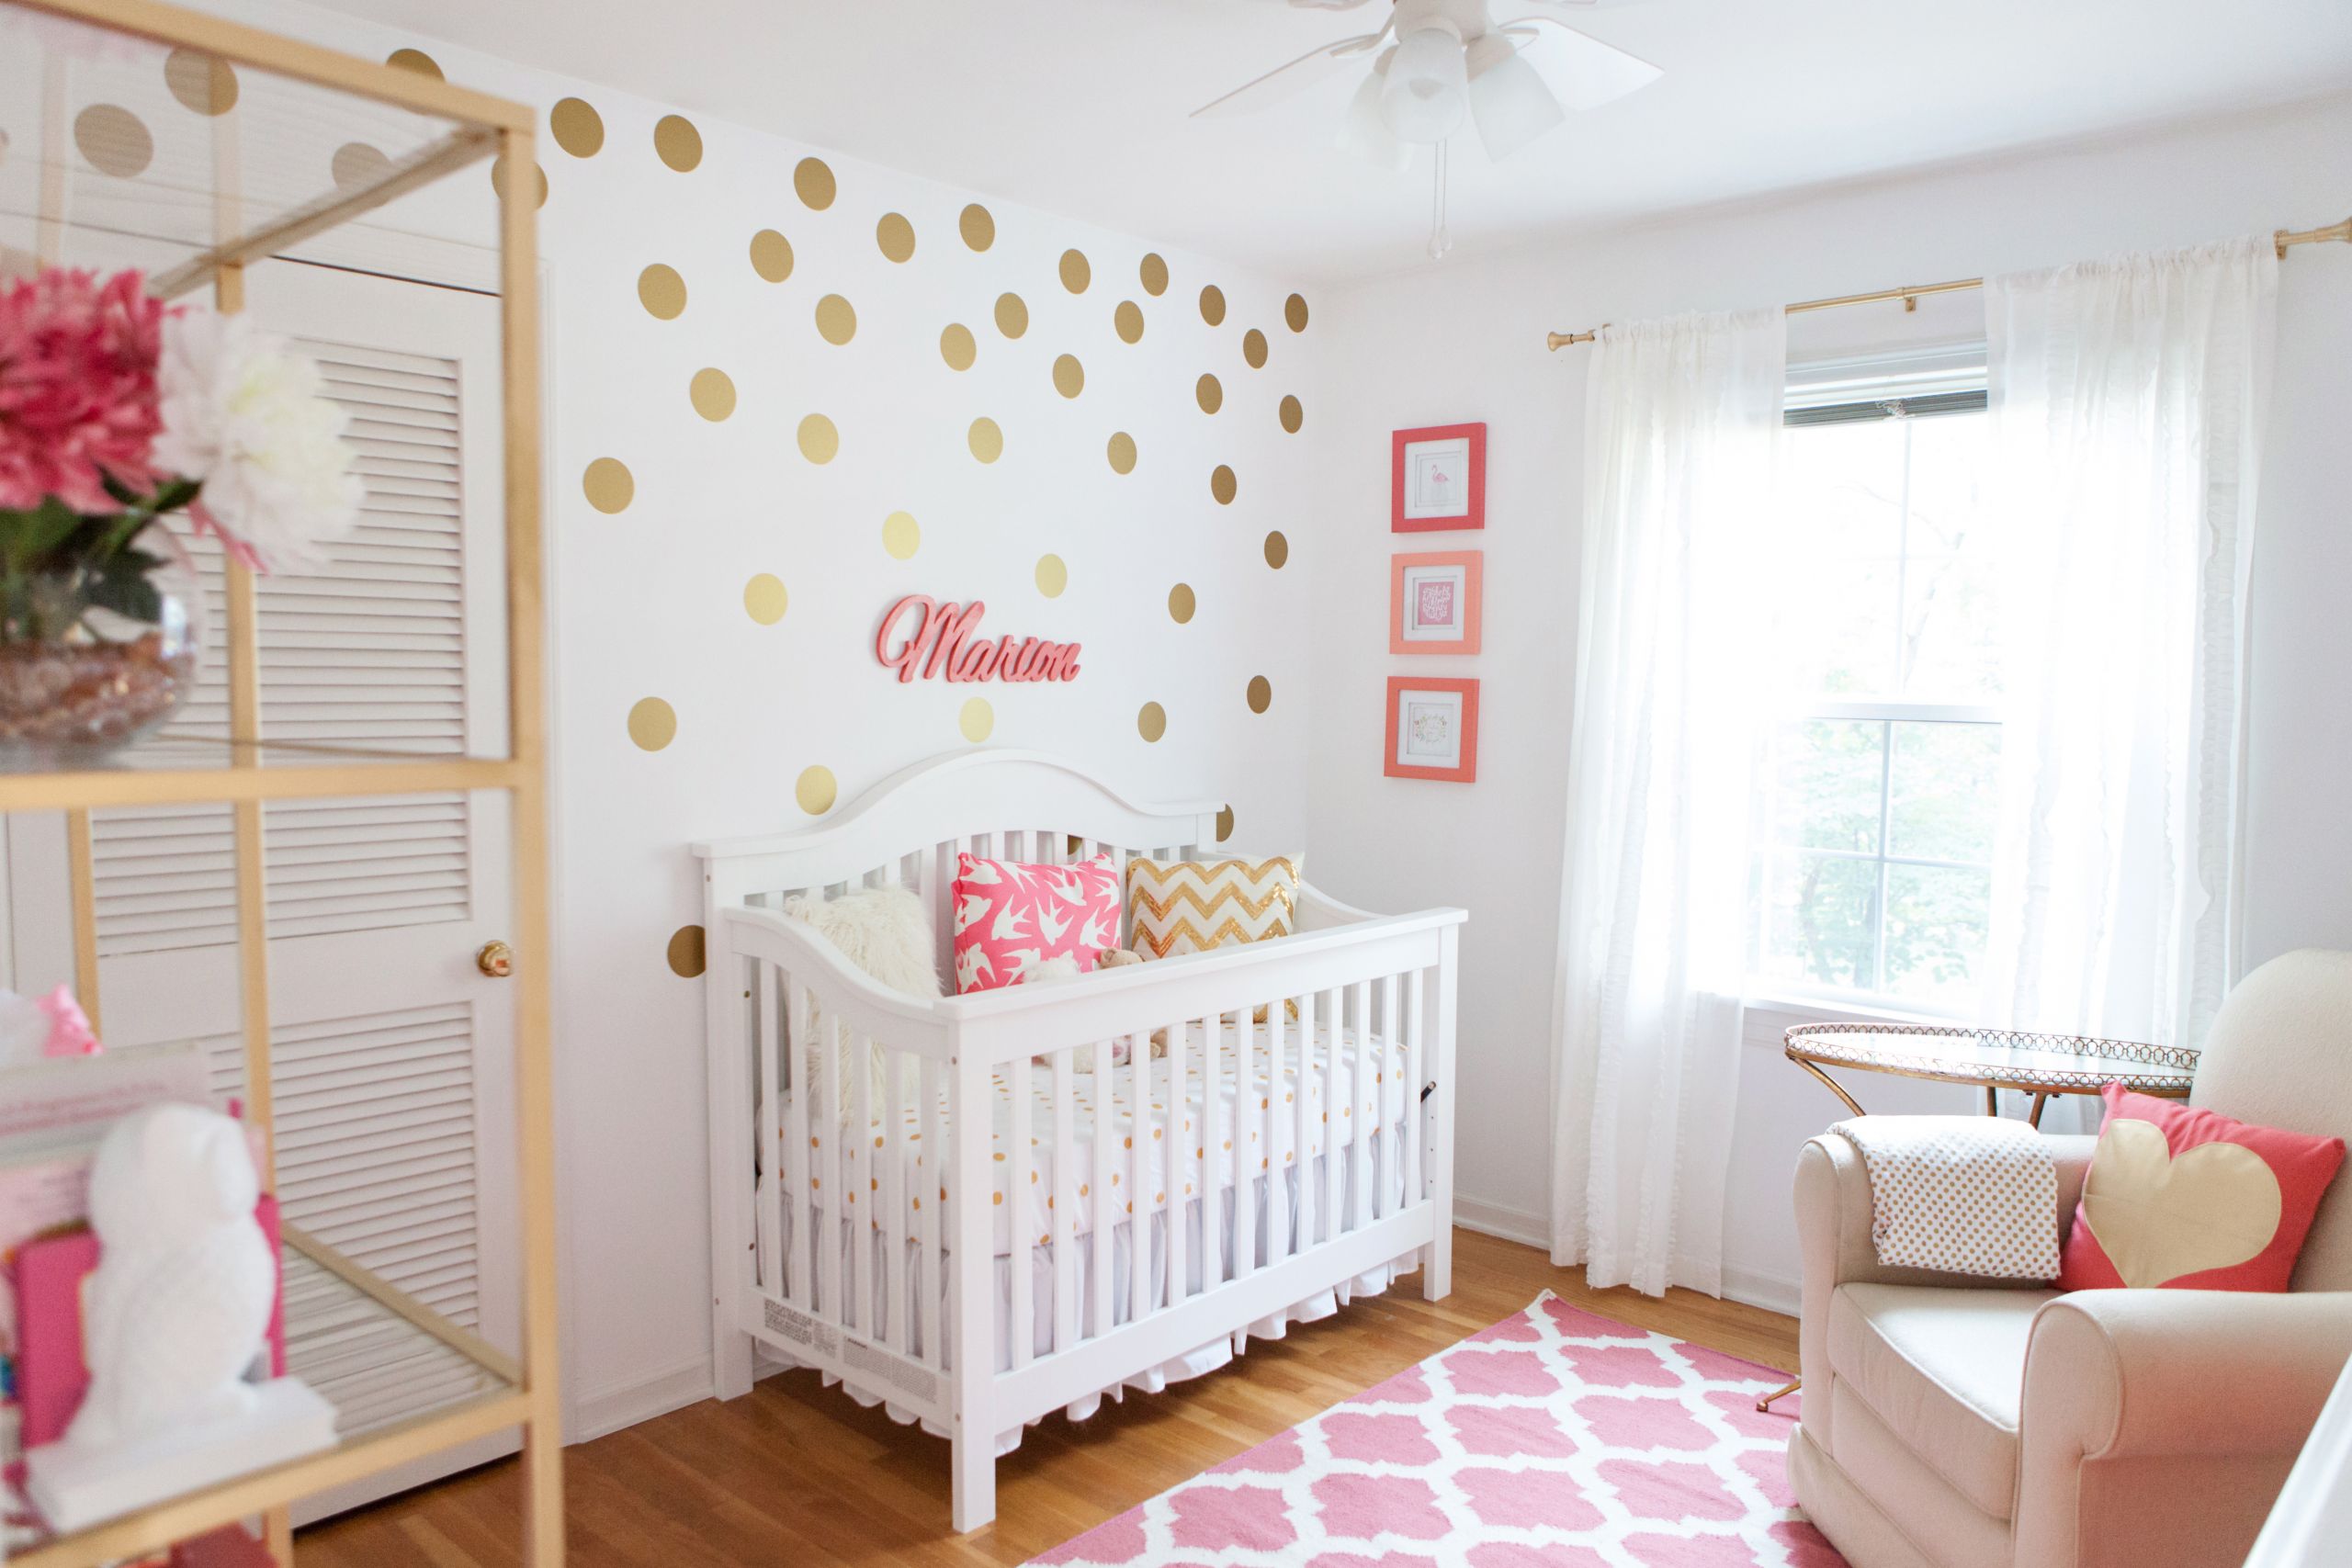 Baby Decorating Ideas
 Marion s Coral and Gold Polka Dot Nursery Project Nursery